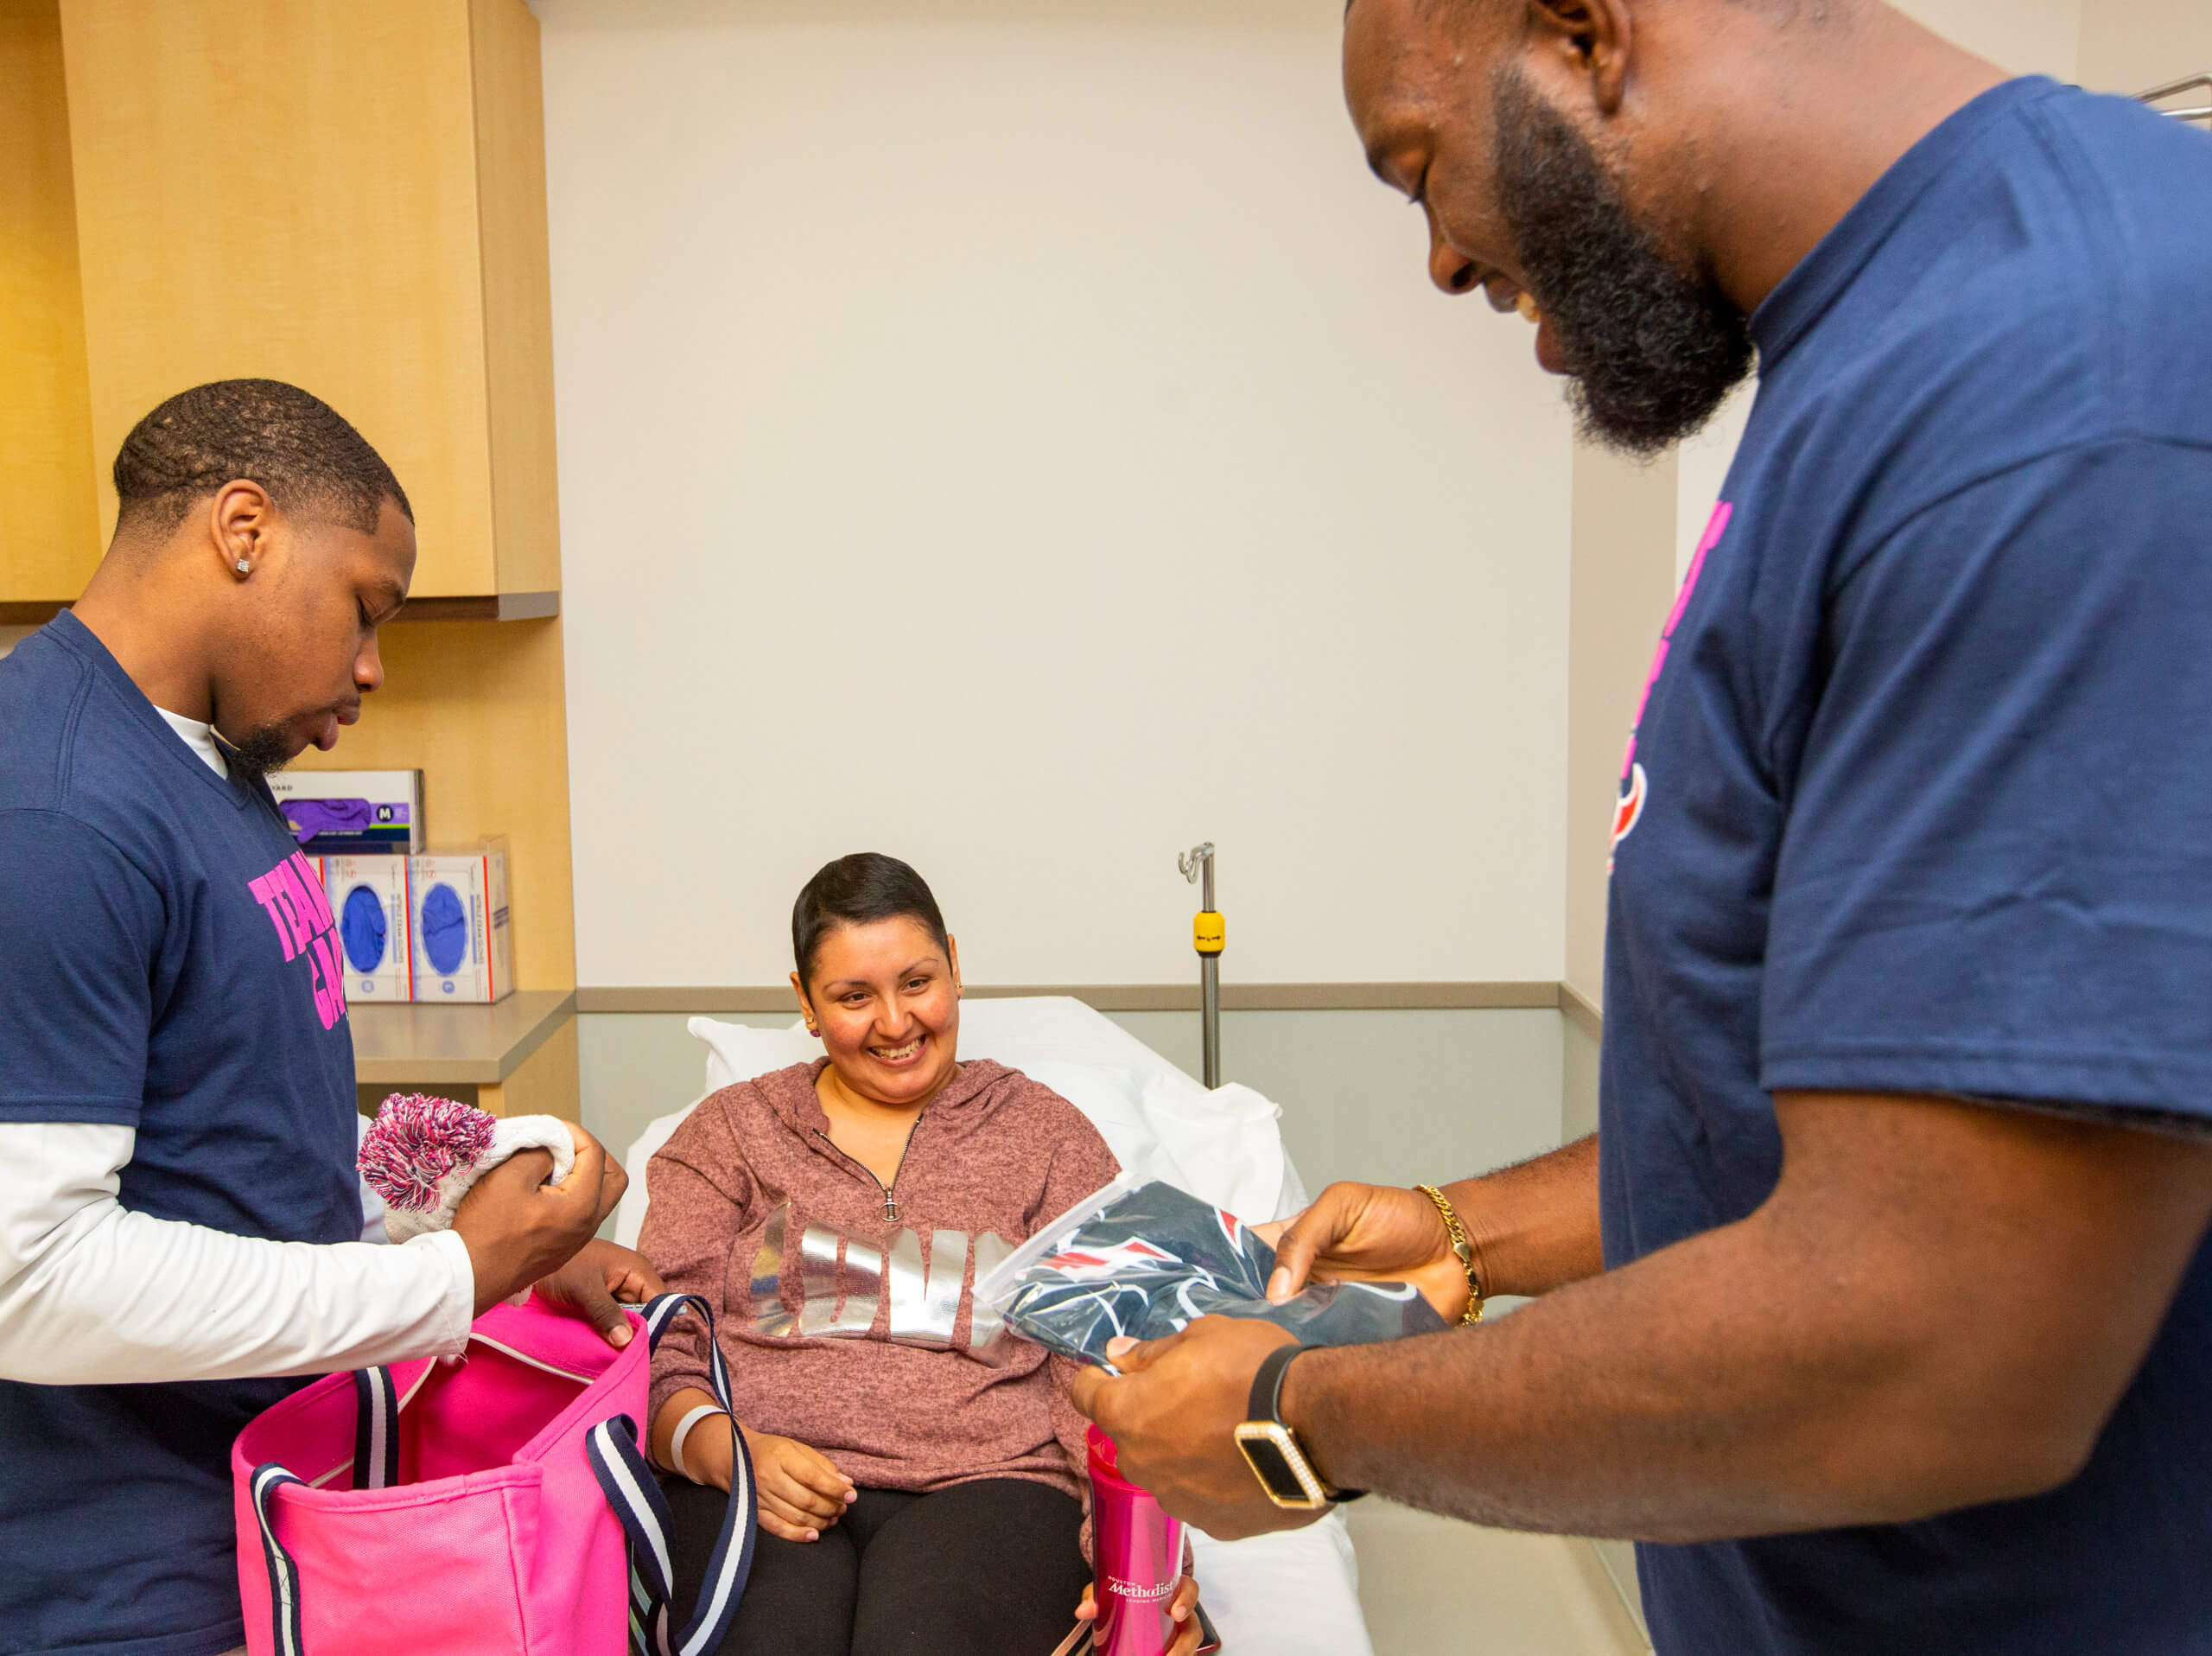 Each breast cancer patient received pink Houston Texans bags filled with team gear.